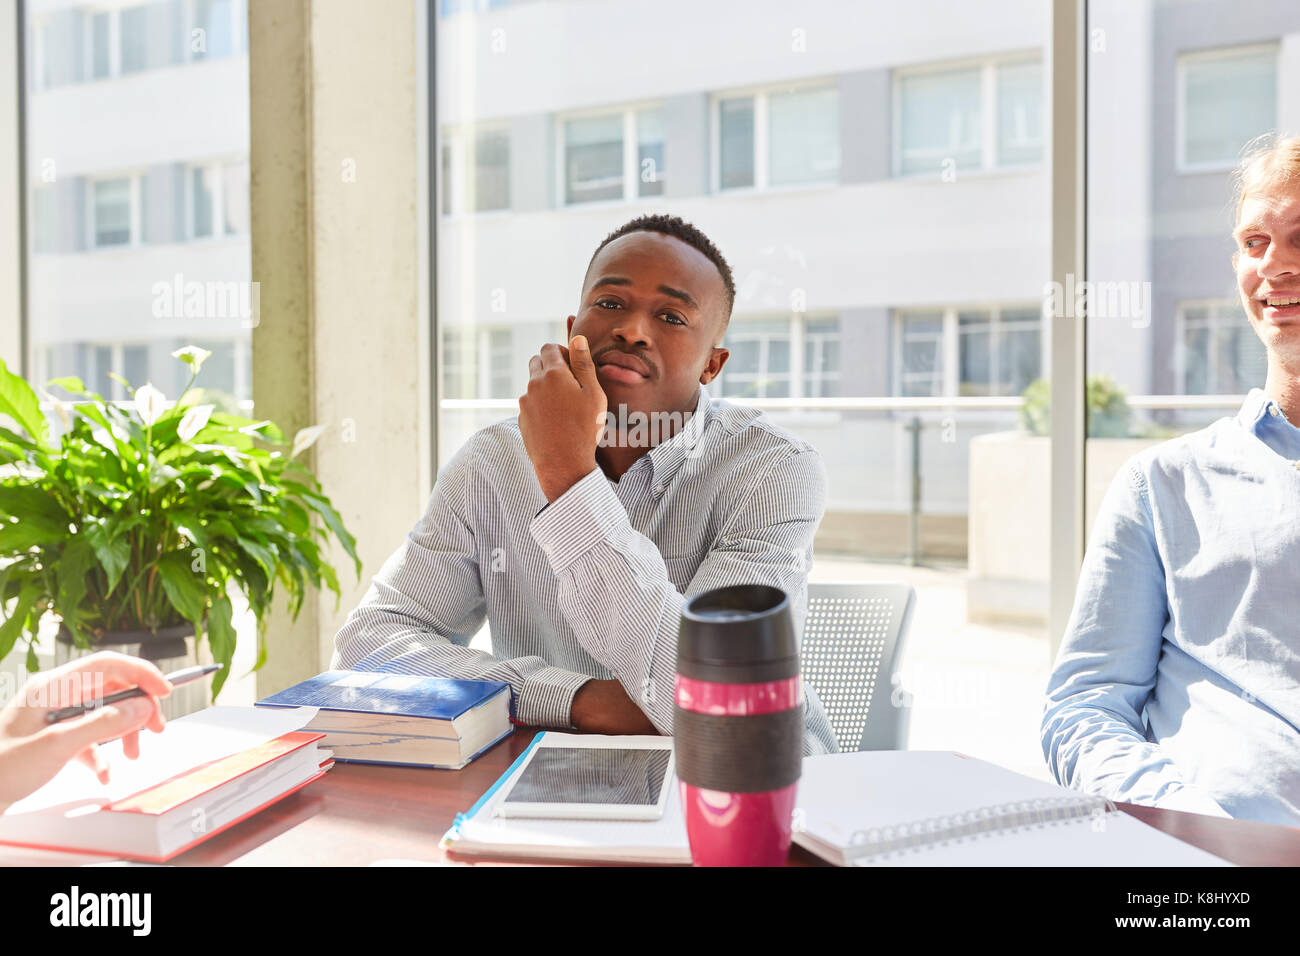 African student in study group at university classroom Stock Photo